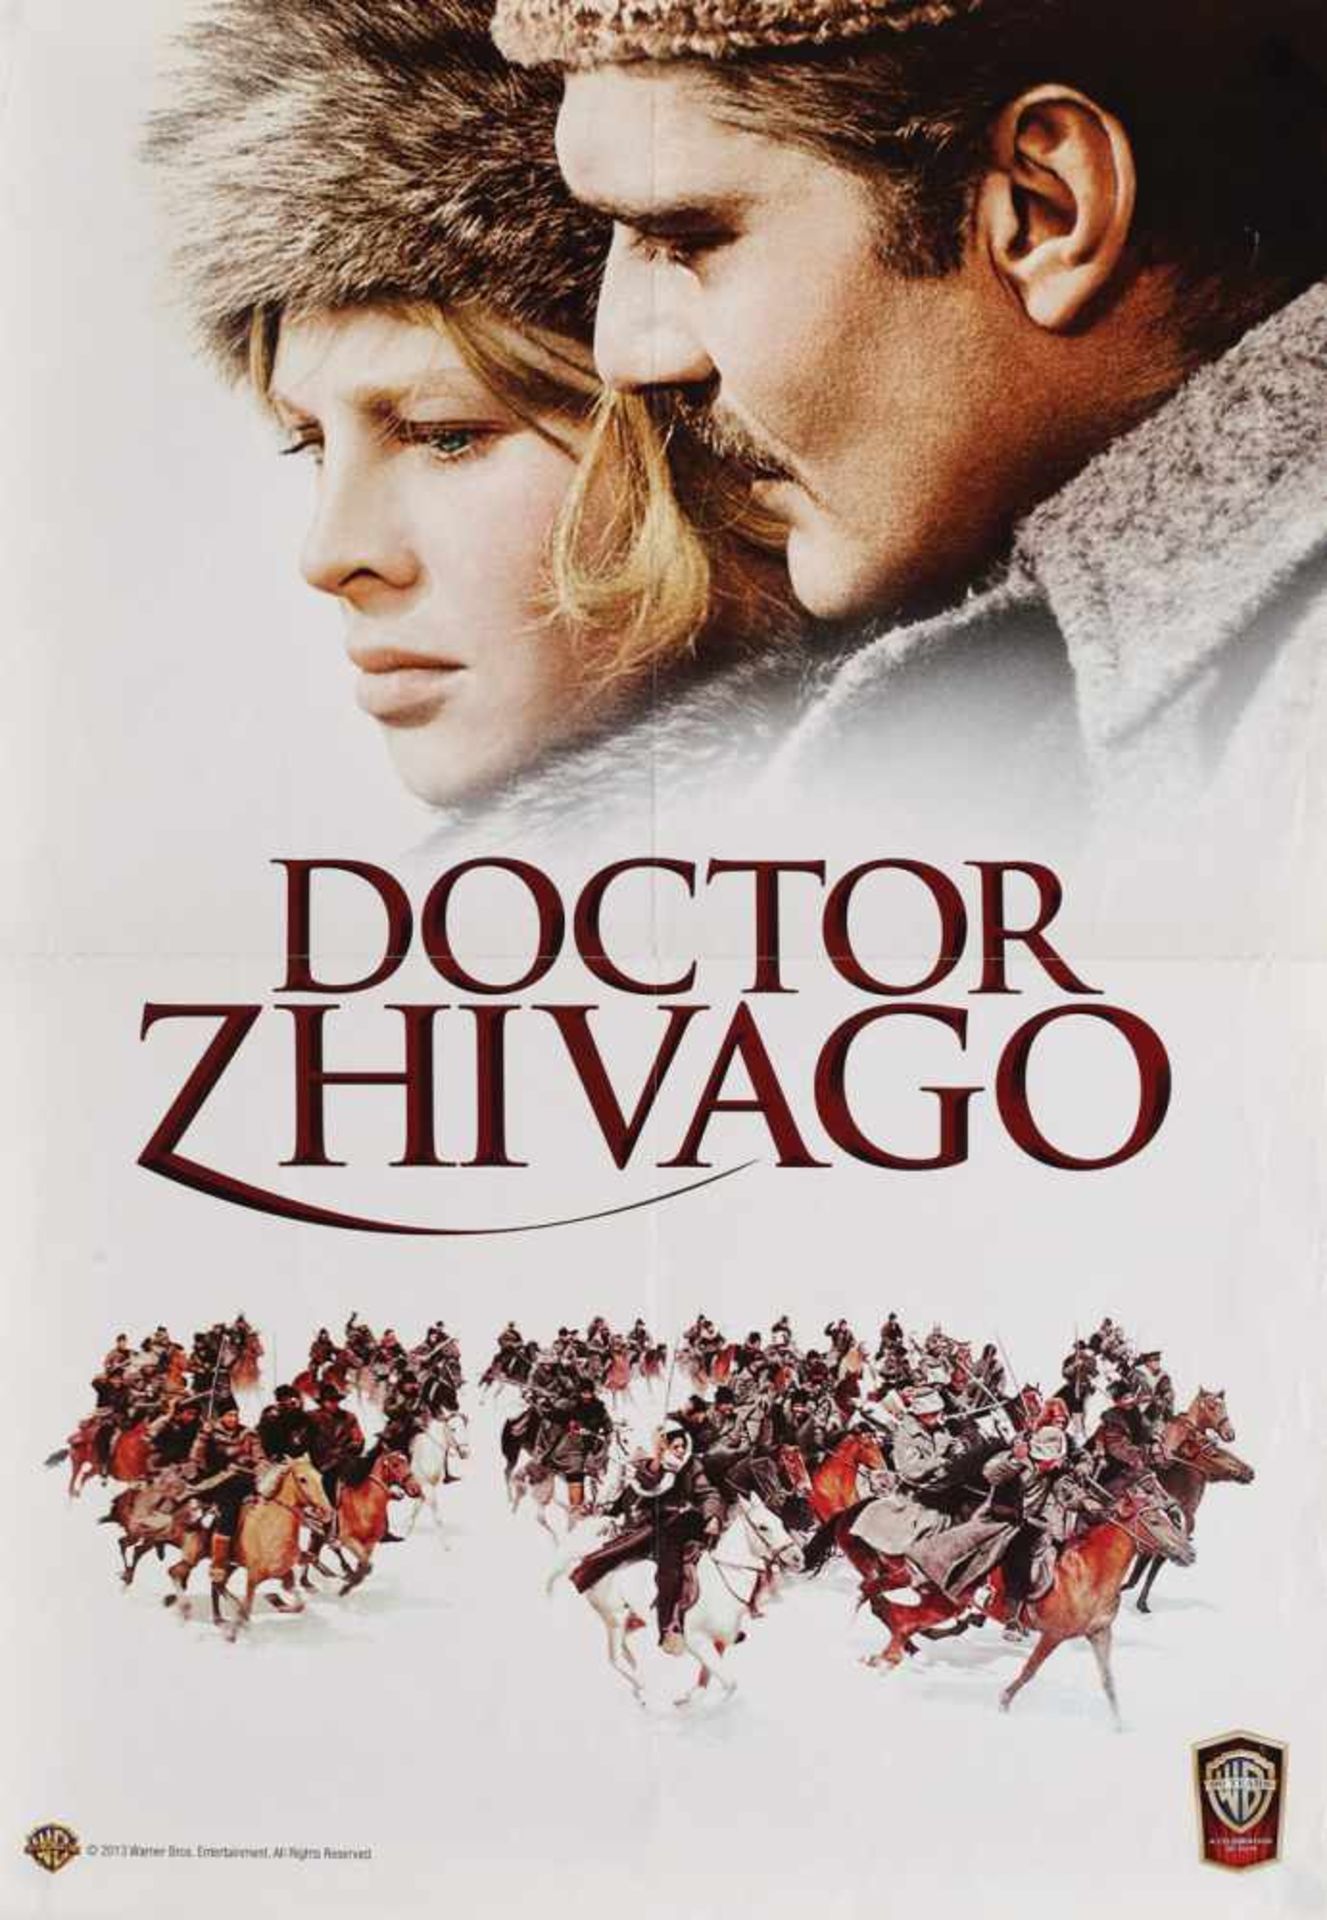 Movie poster for "Doctor Zhivago", with Omar Sharif and Julie Julie Christie, 1965; print from 2013